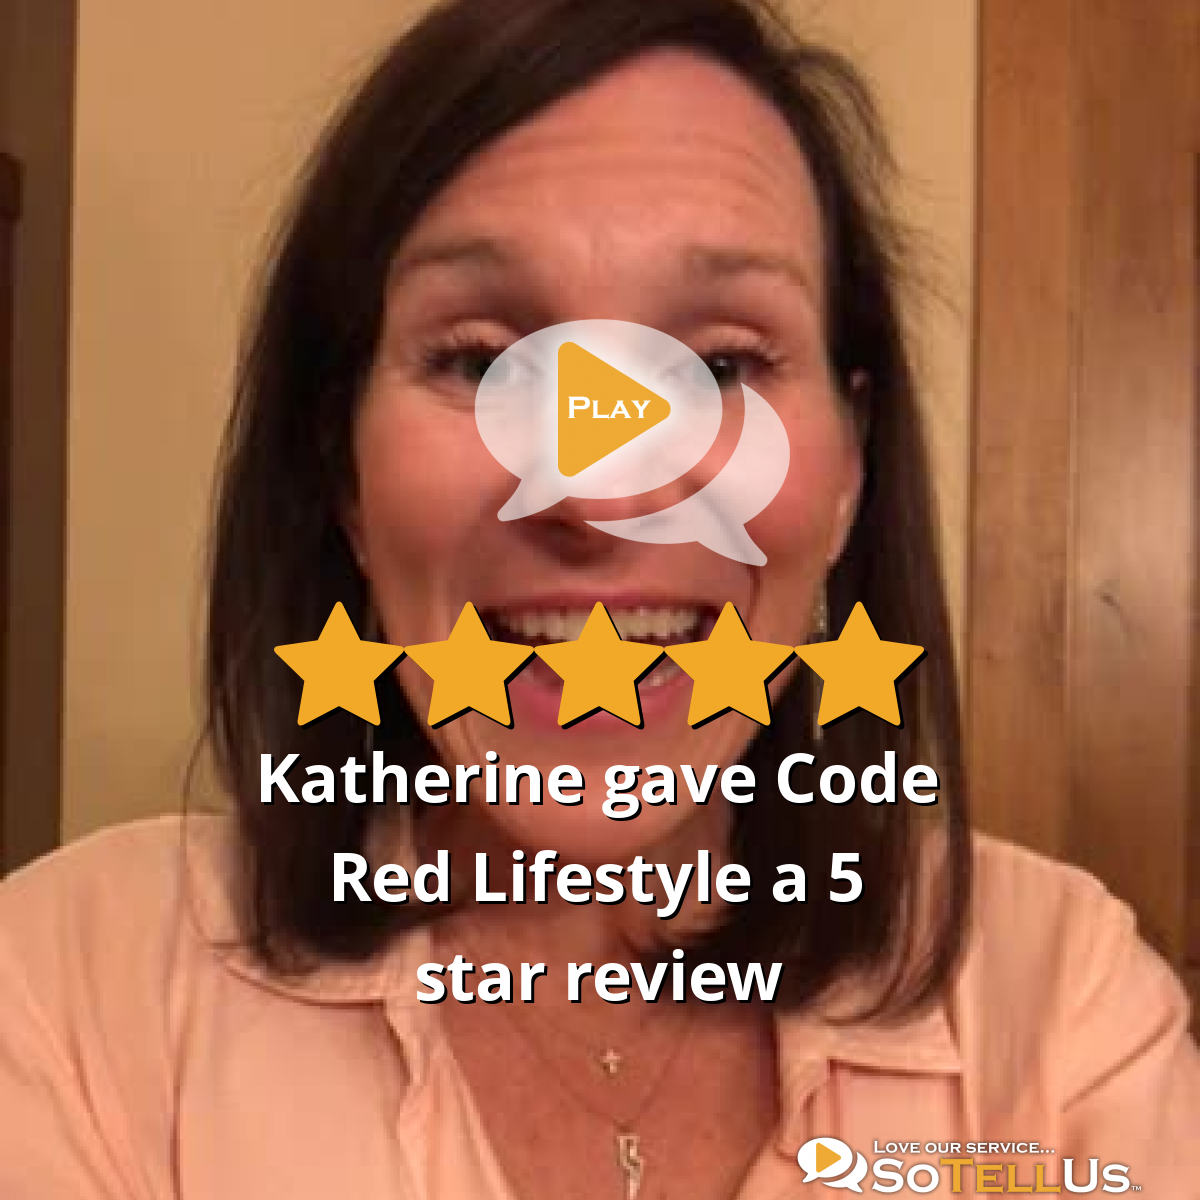 Katherine B gave Code Red Lifestyle a 5 star review on ...